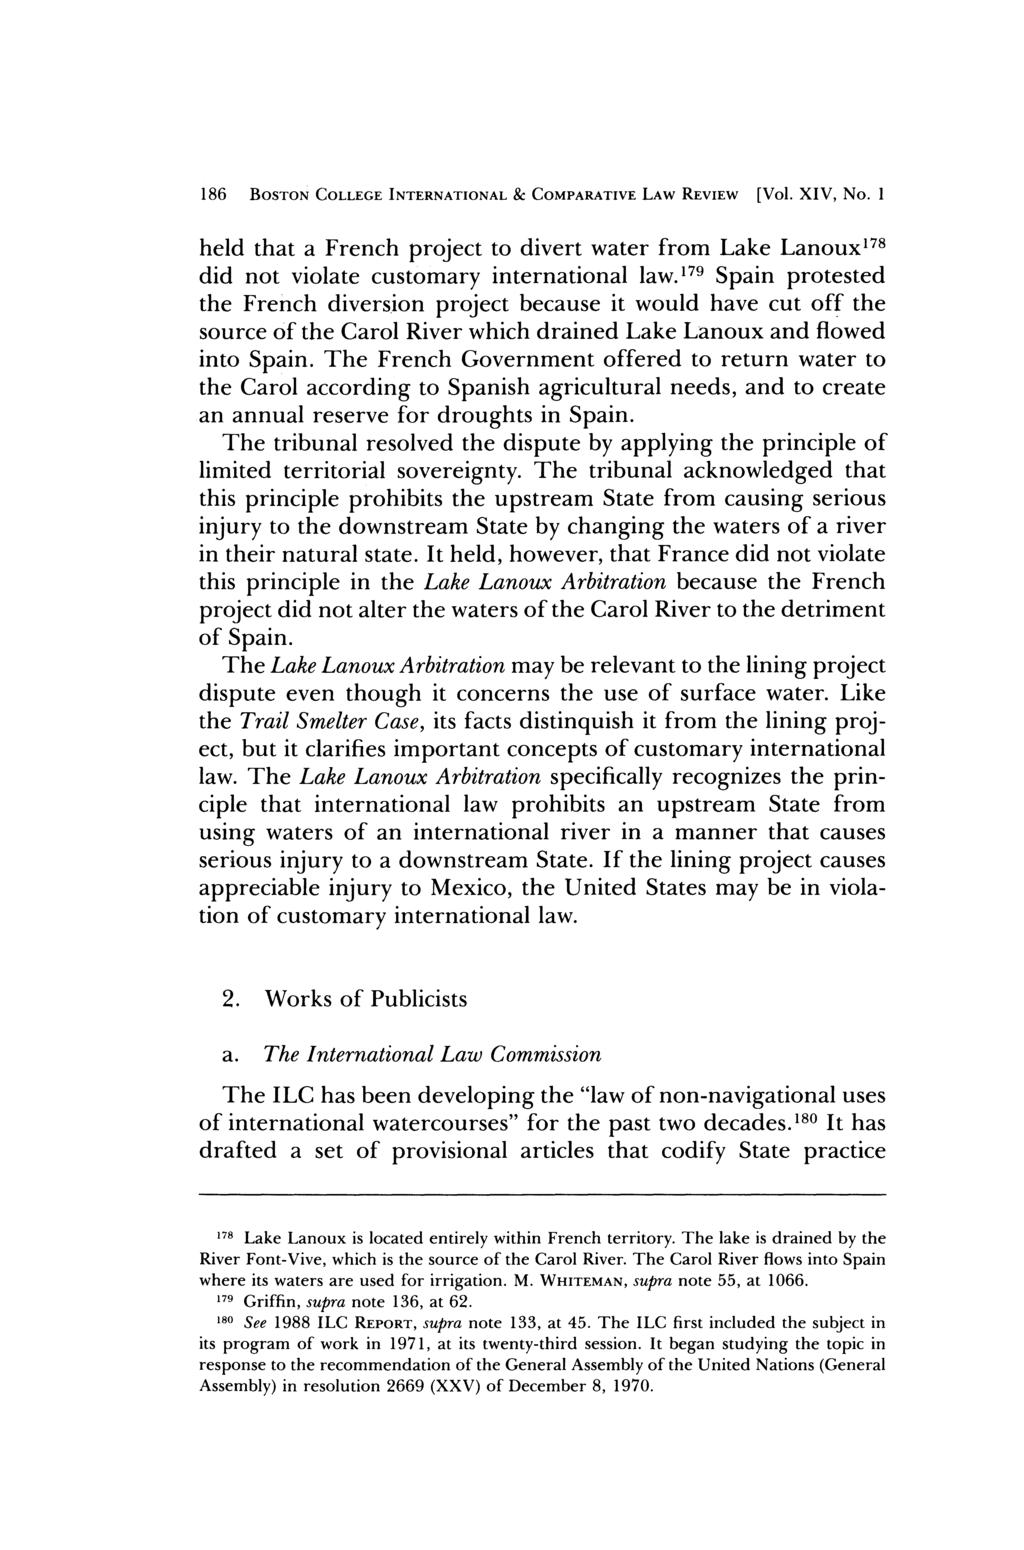 186 BOSTON COLLEGE INTERNATIONAL & COMPARATIVE LAW REVIEW [Vol. XIV, No. I held that a French project to divert water from Lake Lanoux I78 did not violate customary international law.